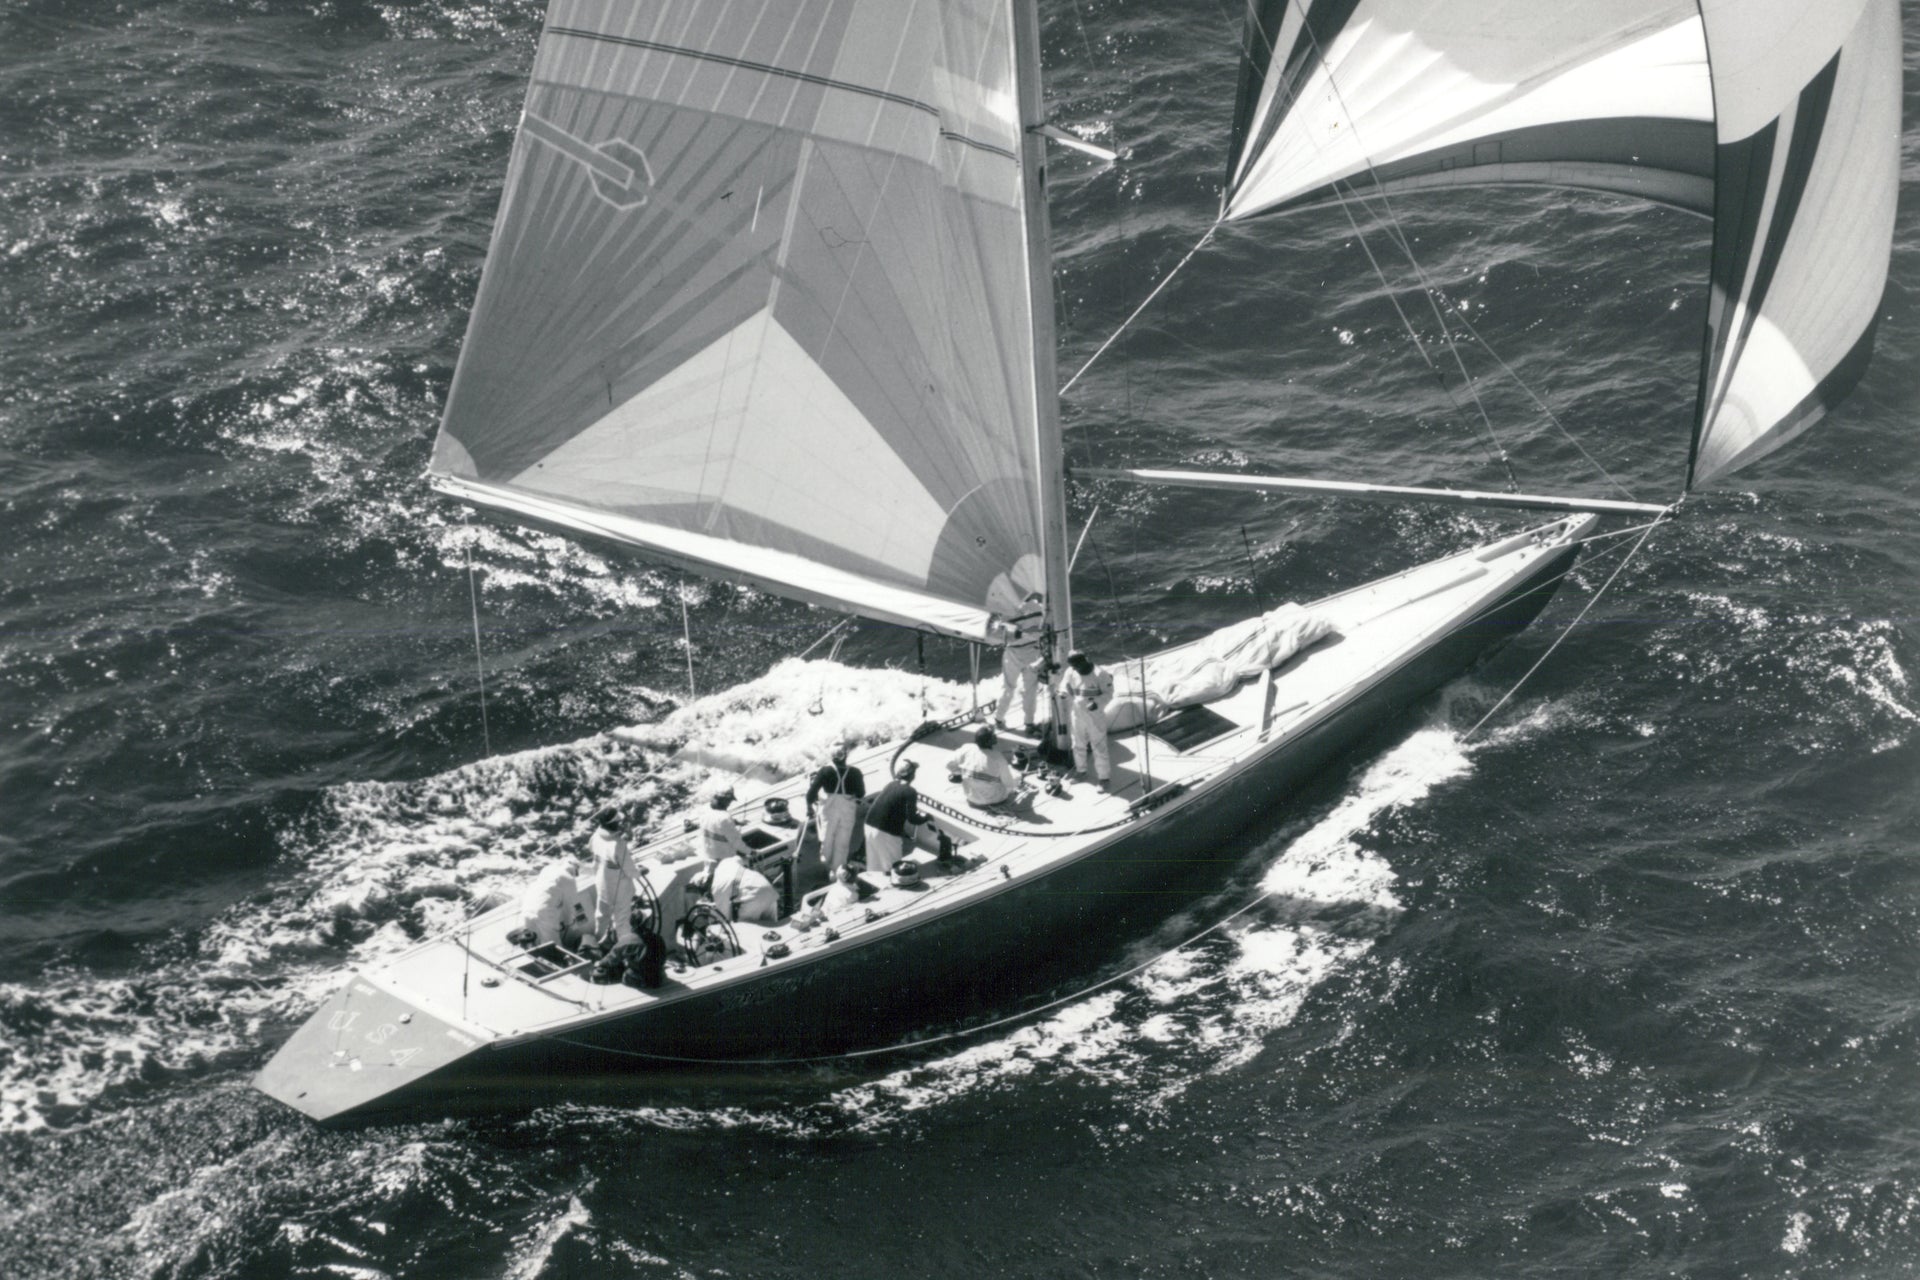 NORTH TECHNOLOGY GROUP CEO, TOM WHIDDEN, CELEBRATES 30 YEARS WITH NORTH SAILS